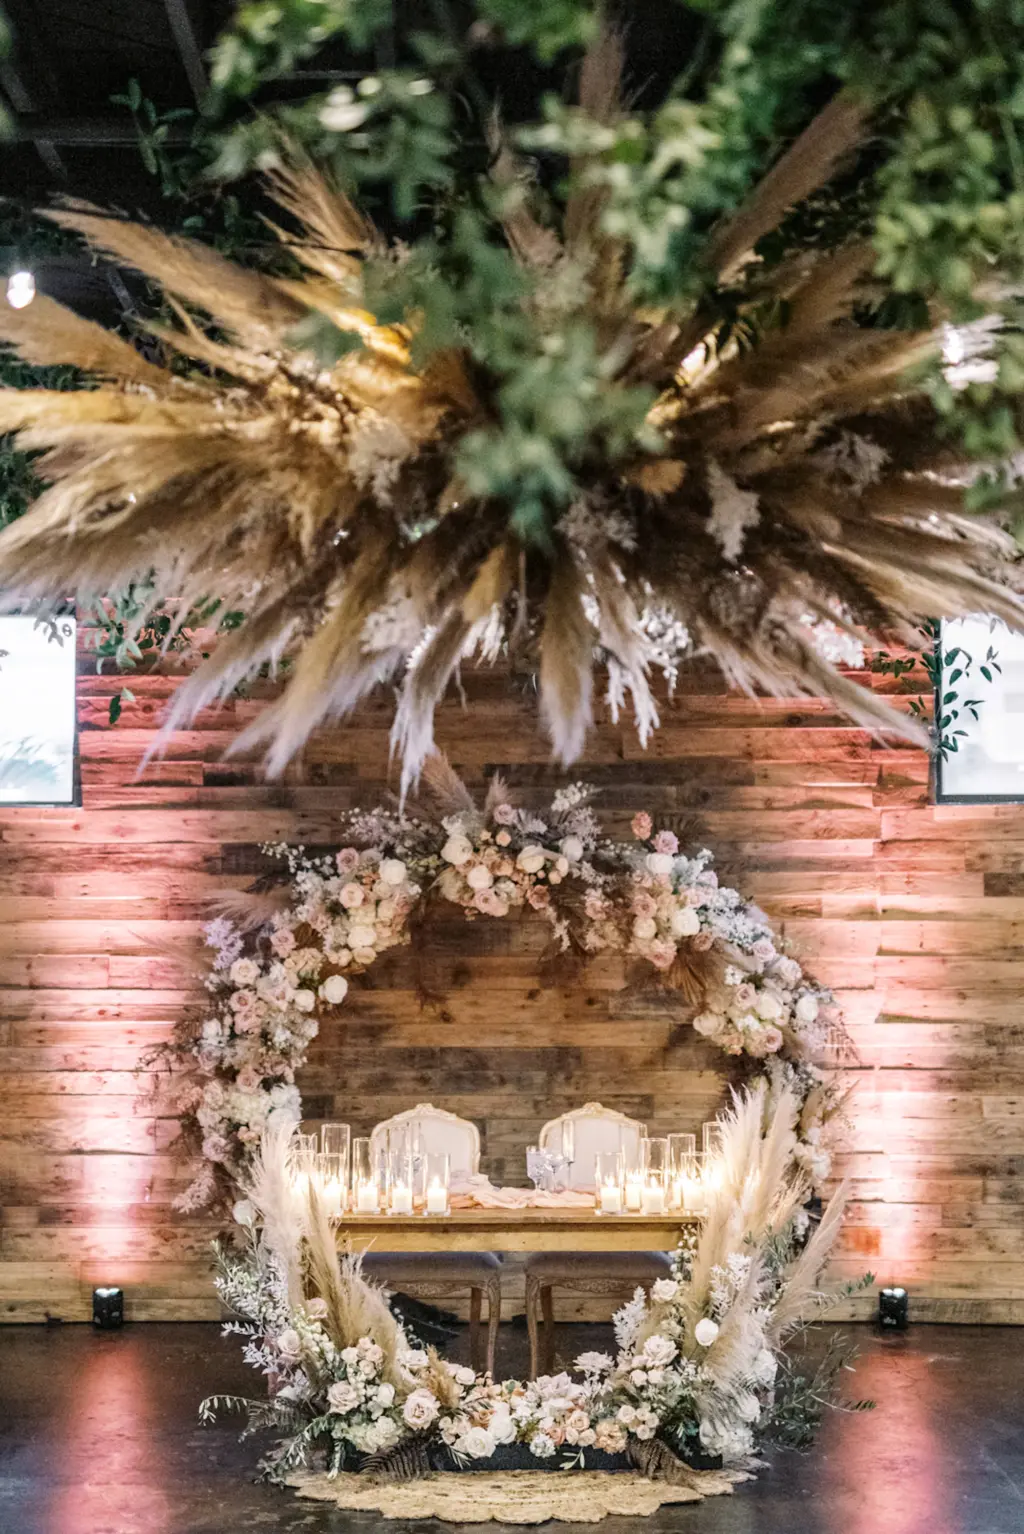 Boho Floral Sweetheart Table with Dried Florals and Candle Decor | St. Petersburg Wedding Venue The West Events